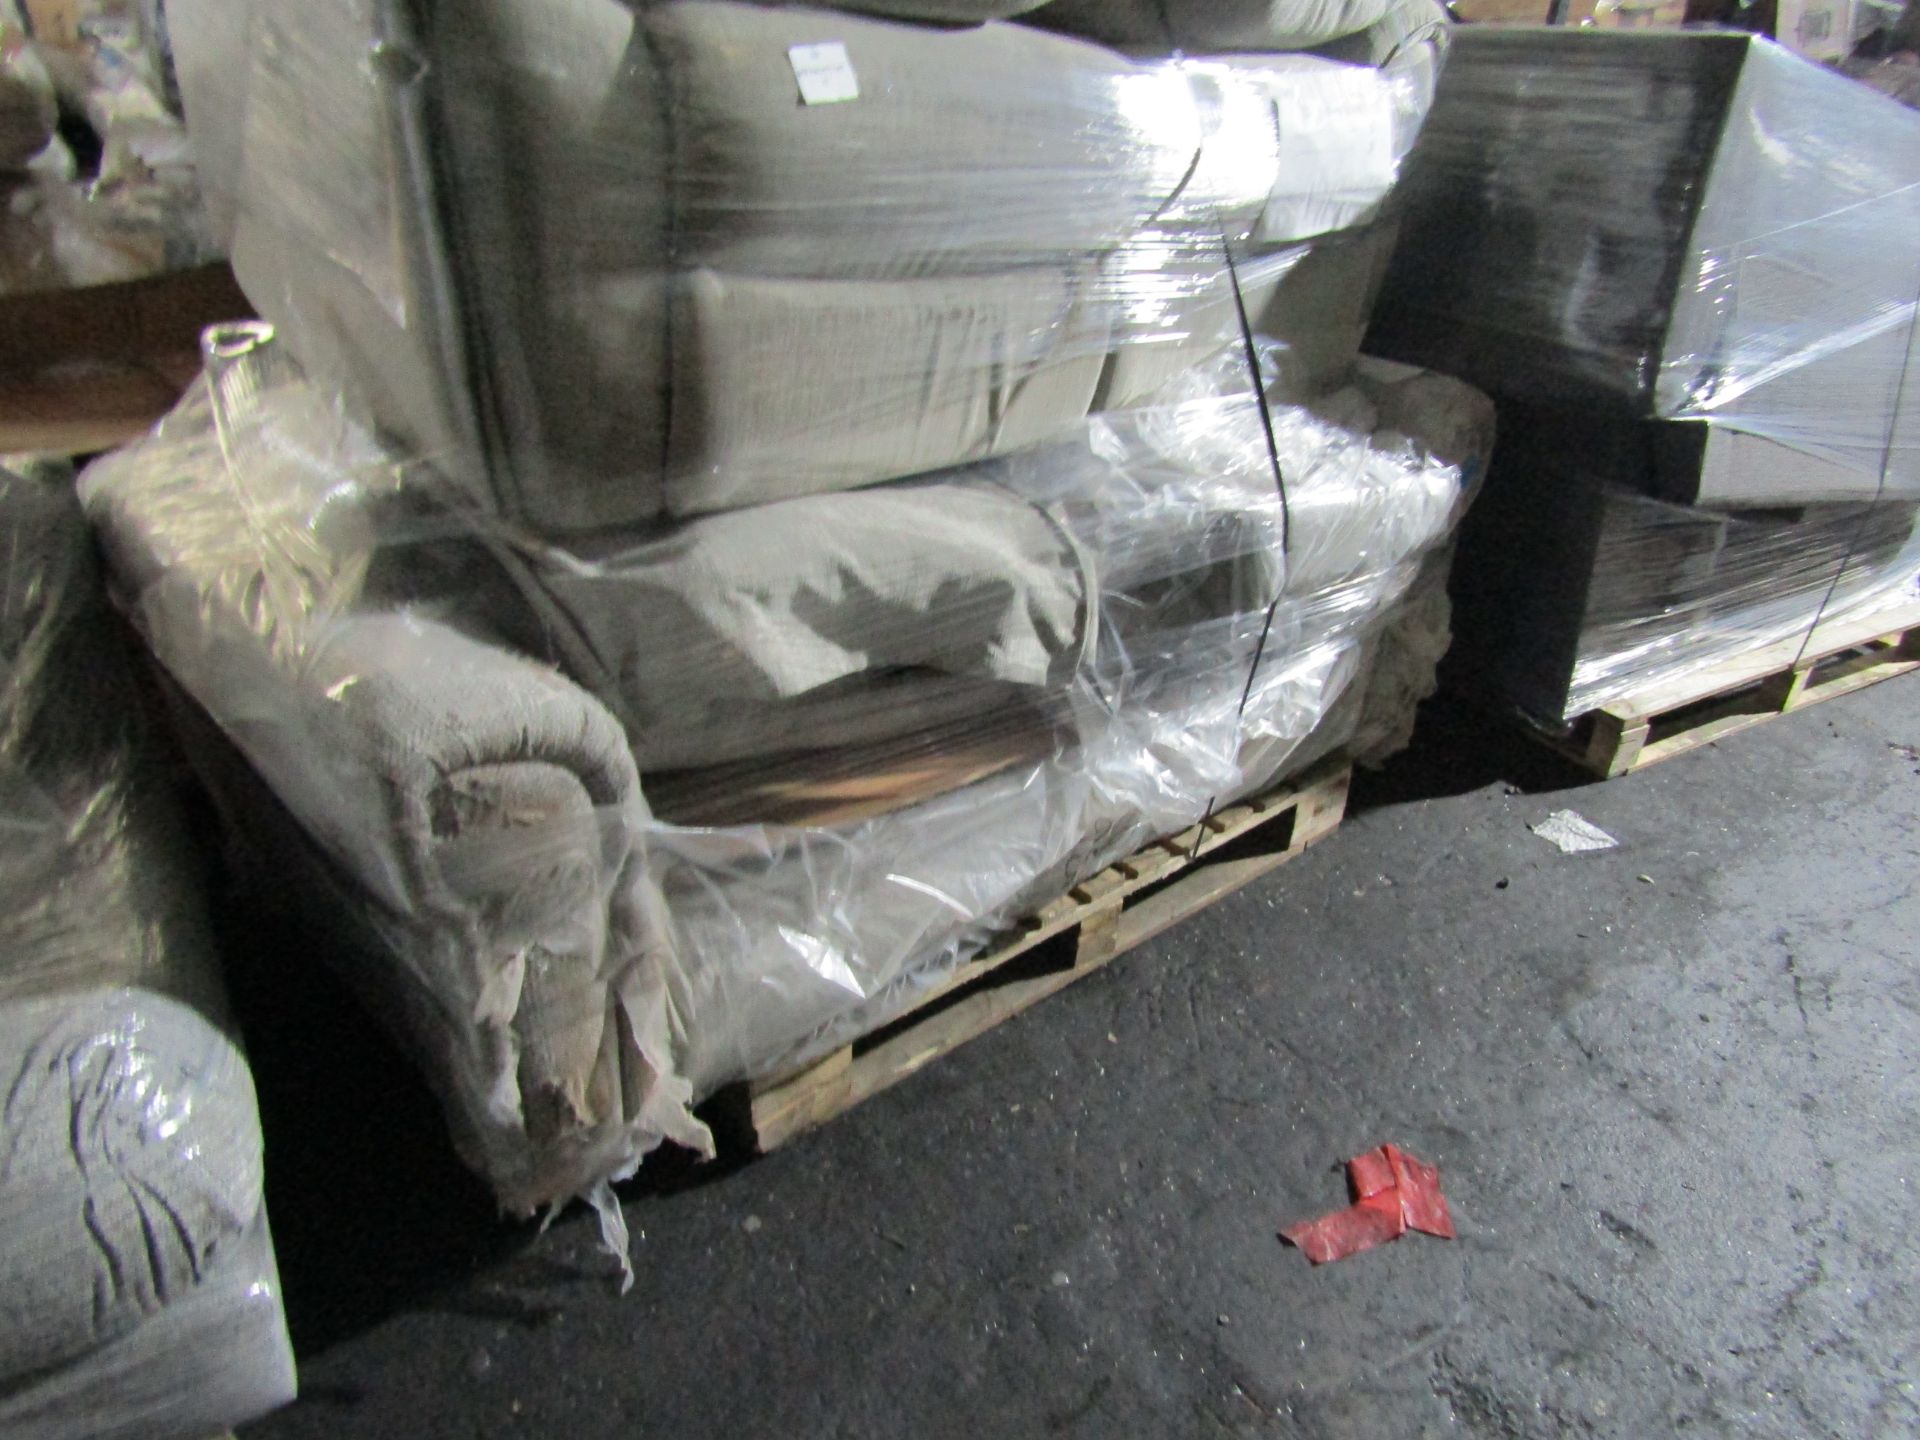 Mixed Lot of 2 x SCS Customer Returns for Repair or Upcycling - Total RRP approx 1899.99This lot